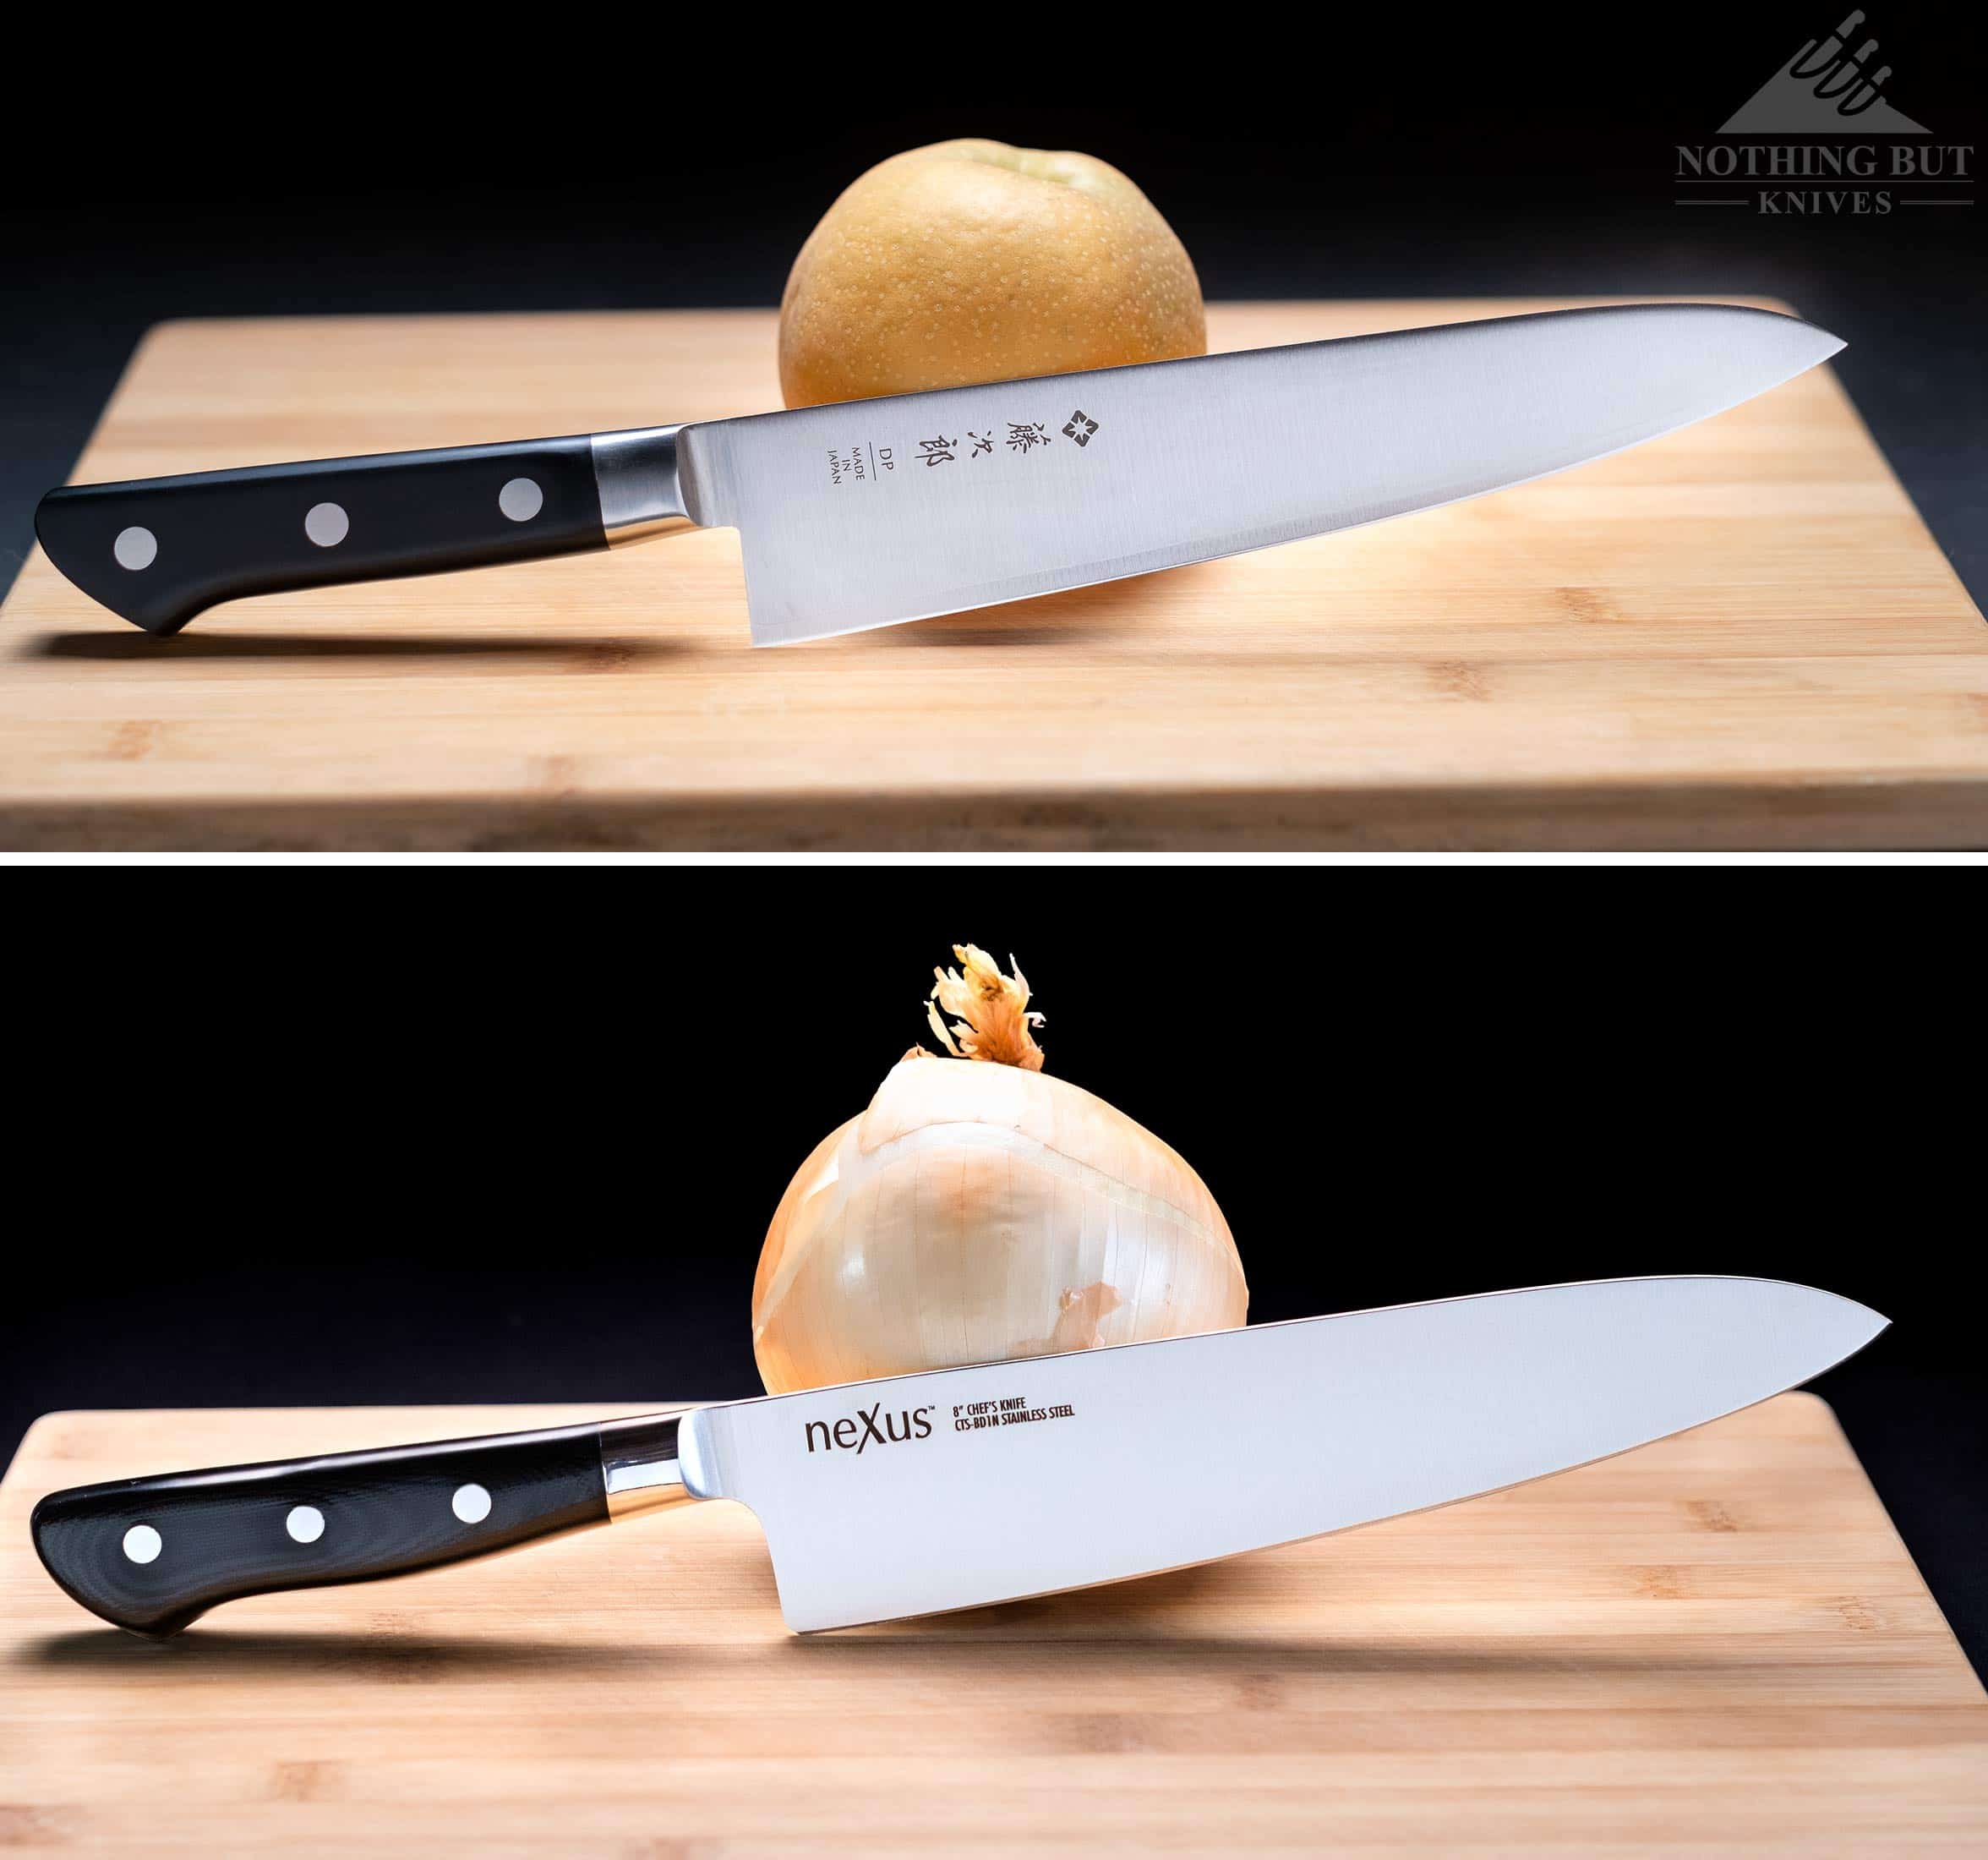 Misen Perfects the Affordable, Quality Chef's Knife - COOL HUNTING®